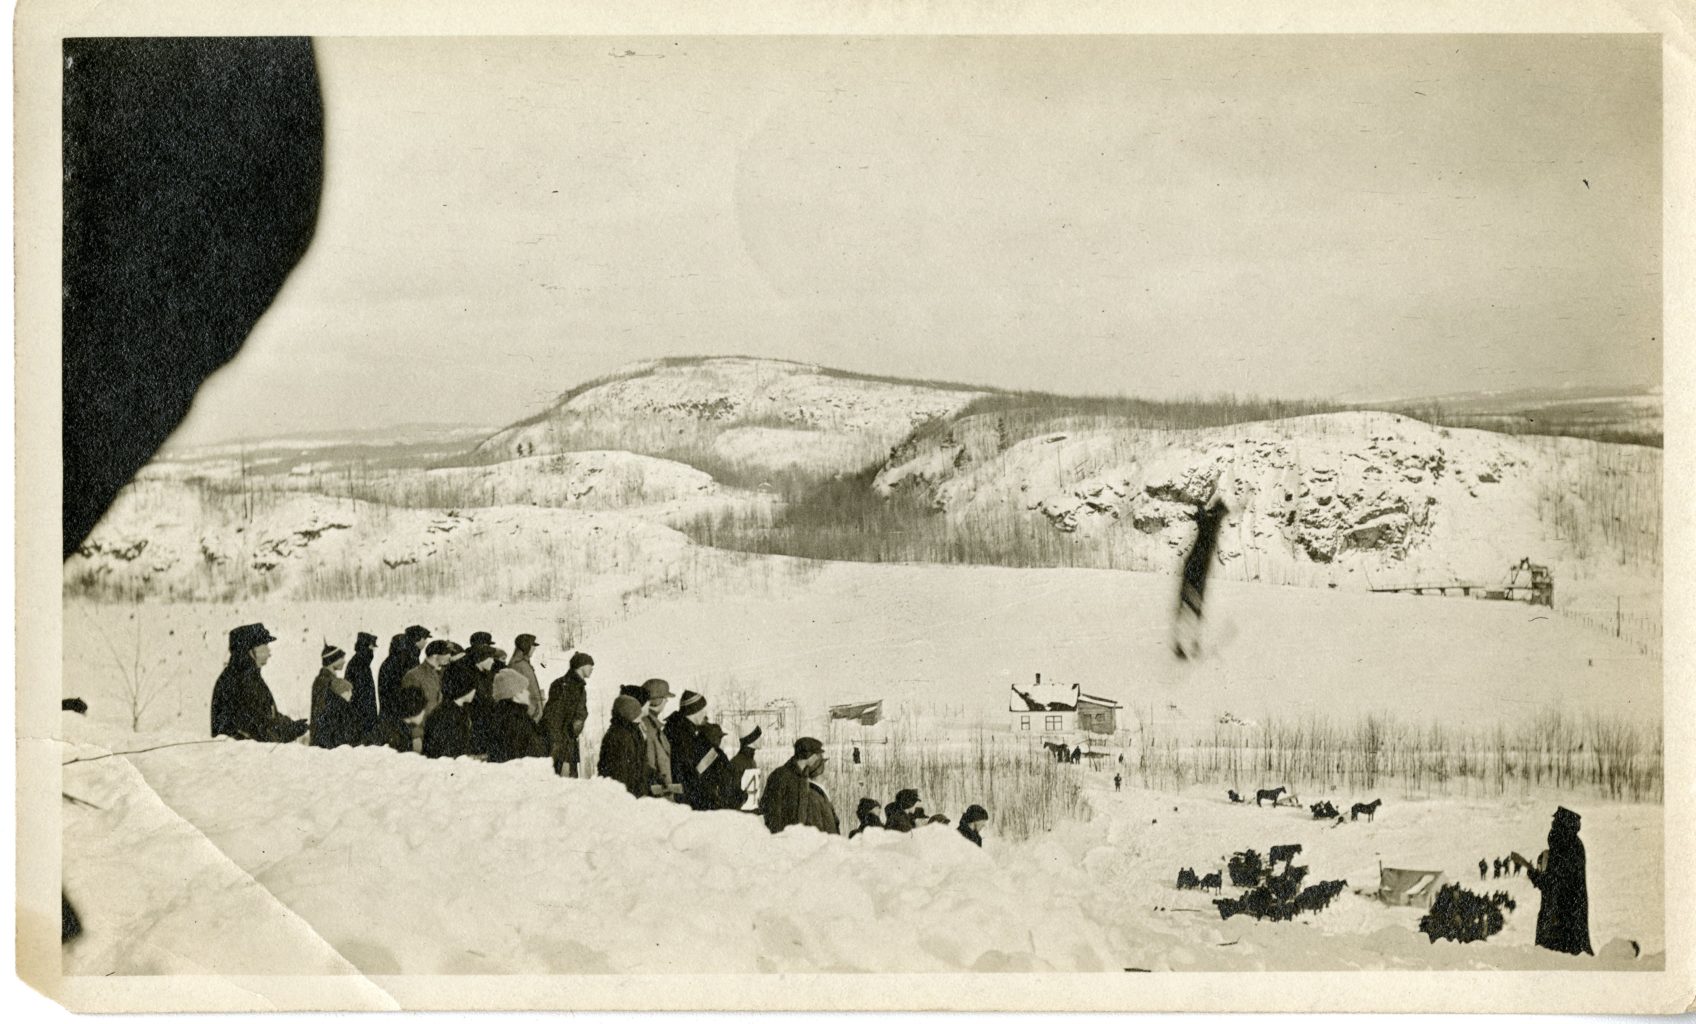 People gather to watch a skier jump.